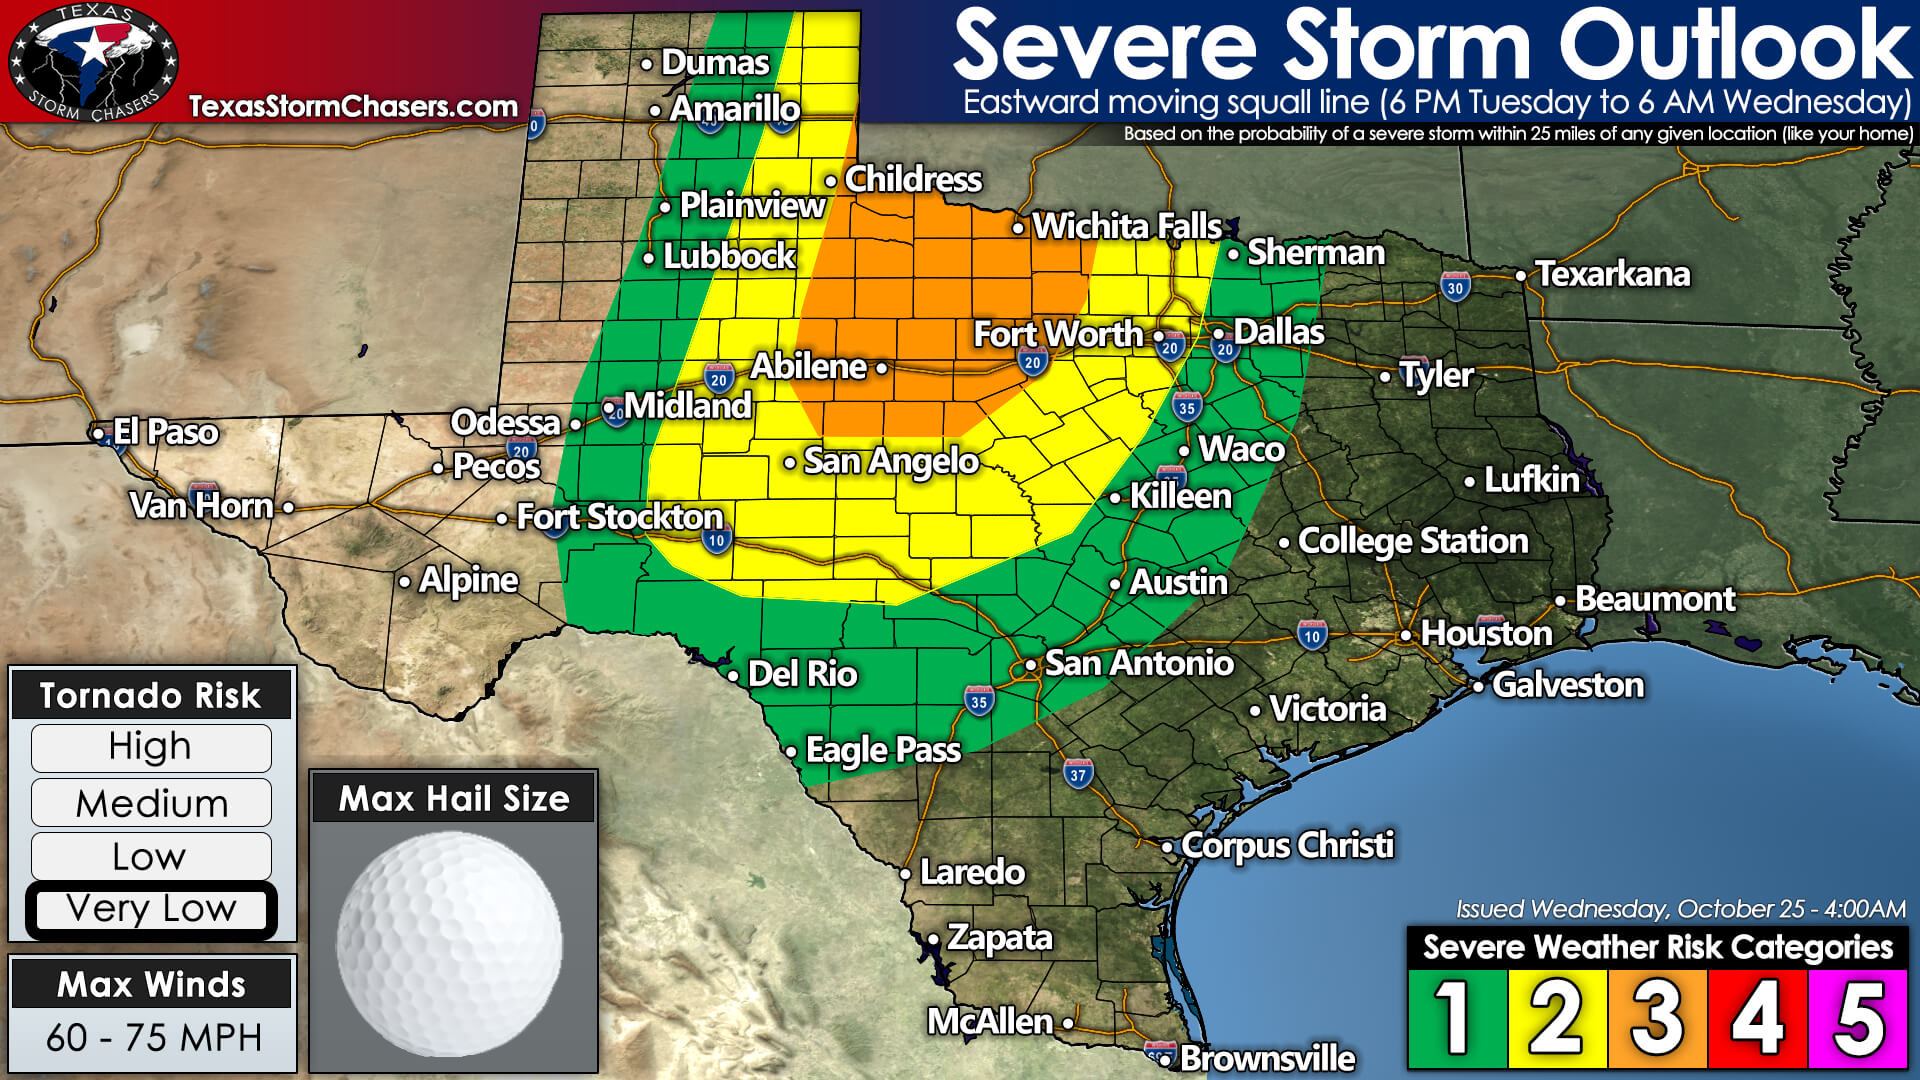 Line of Severe Storms Expected Tuesday Night into Wednesday Morning